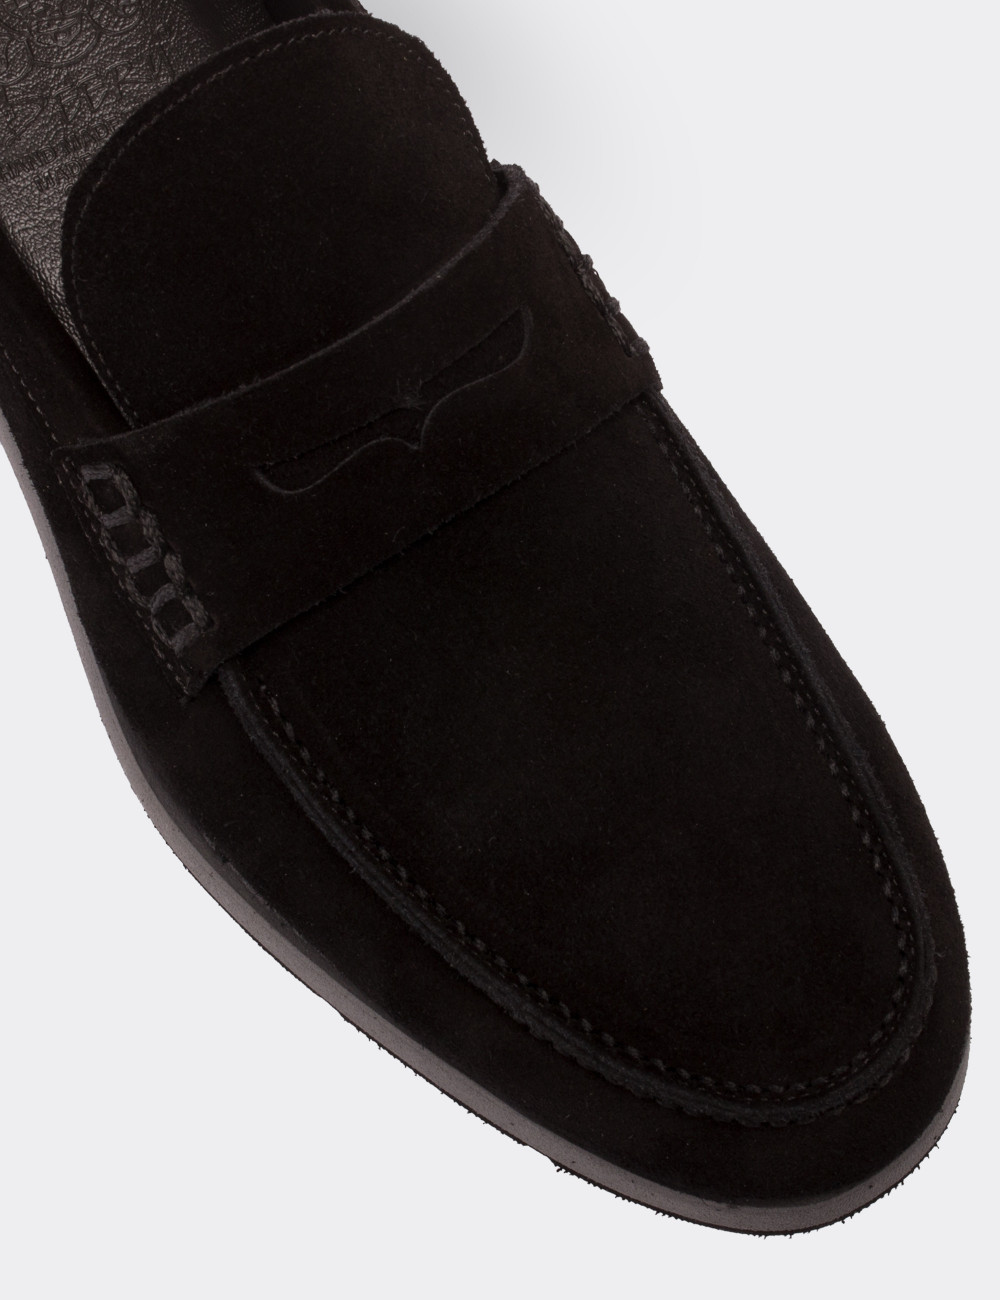 Black Suede Leather Loafers - 01538MSYHE08